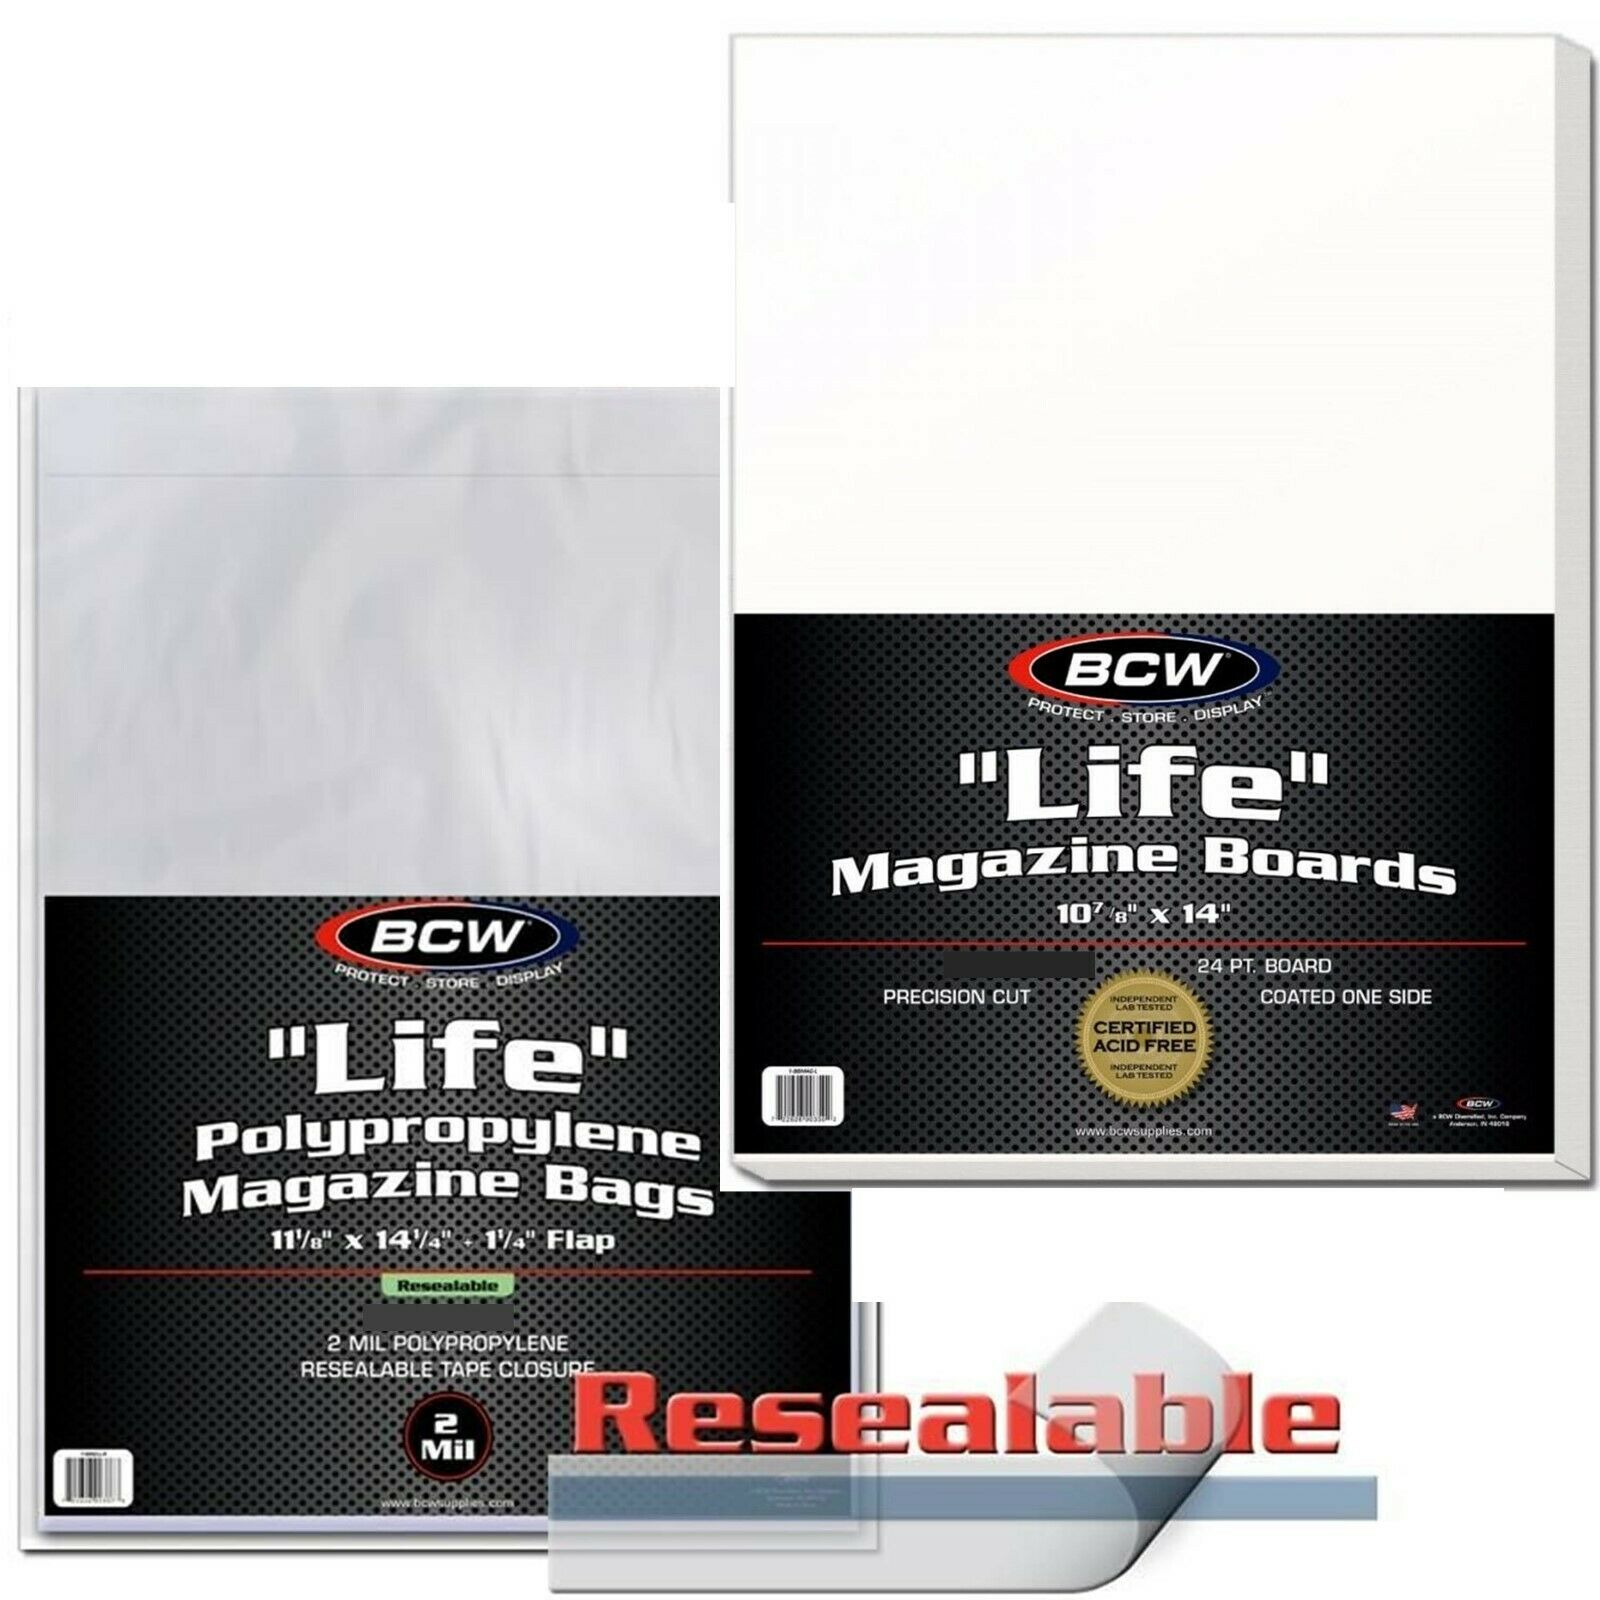 Life Magazine Bcw Bags Backing Boards Combo Lot Large Resealable Sleeves Backer